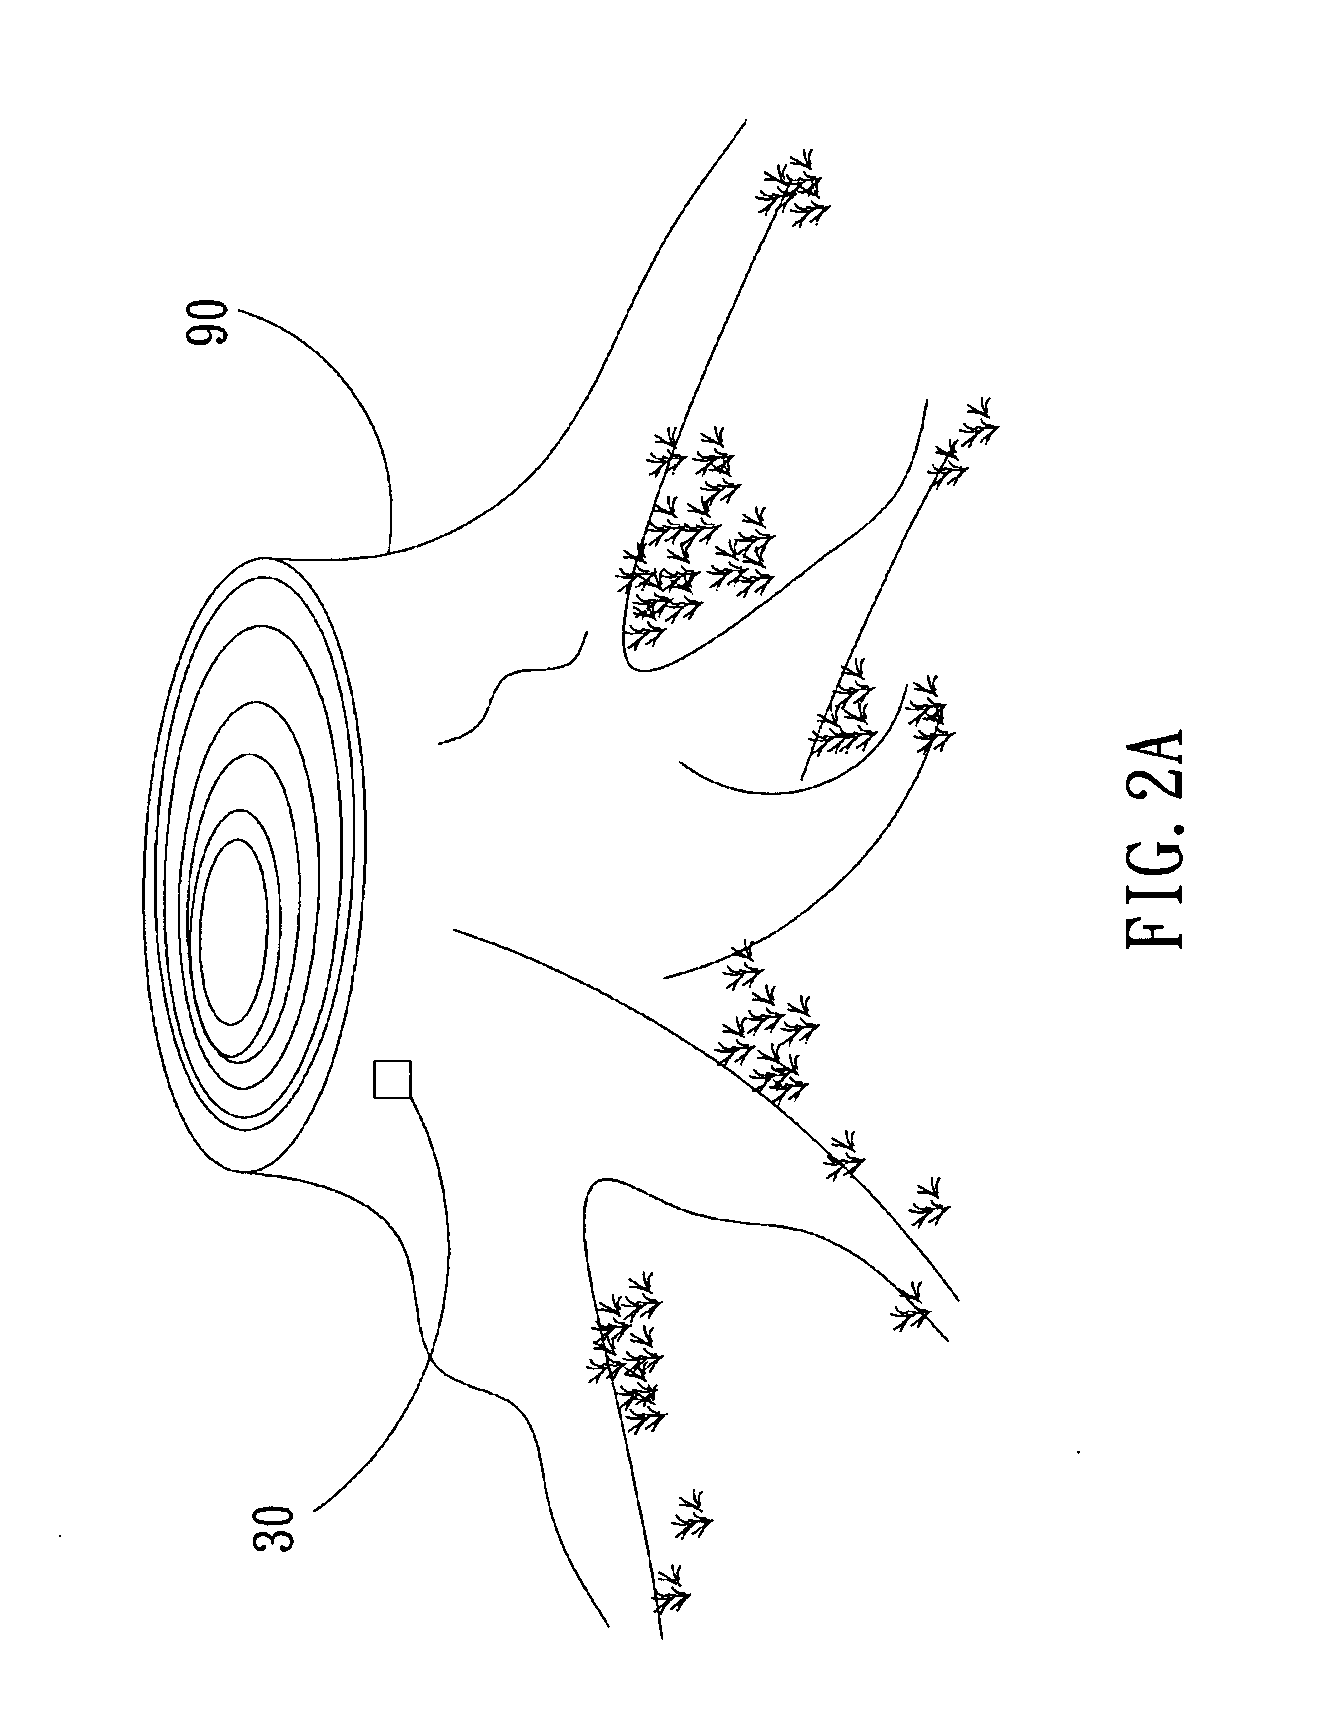 Method and system for monitoring forestry products